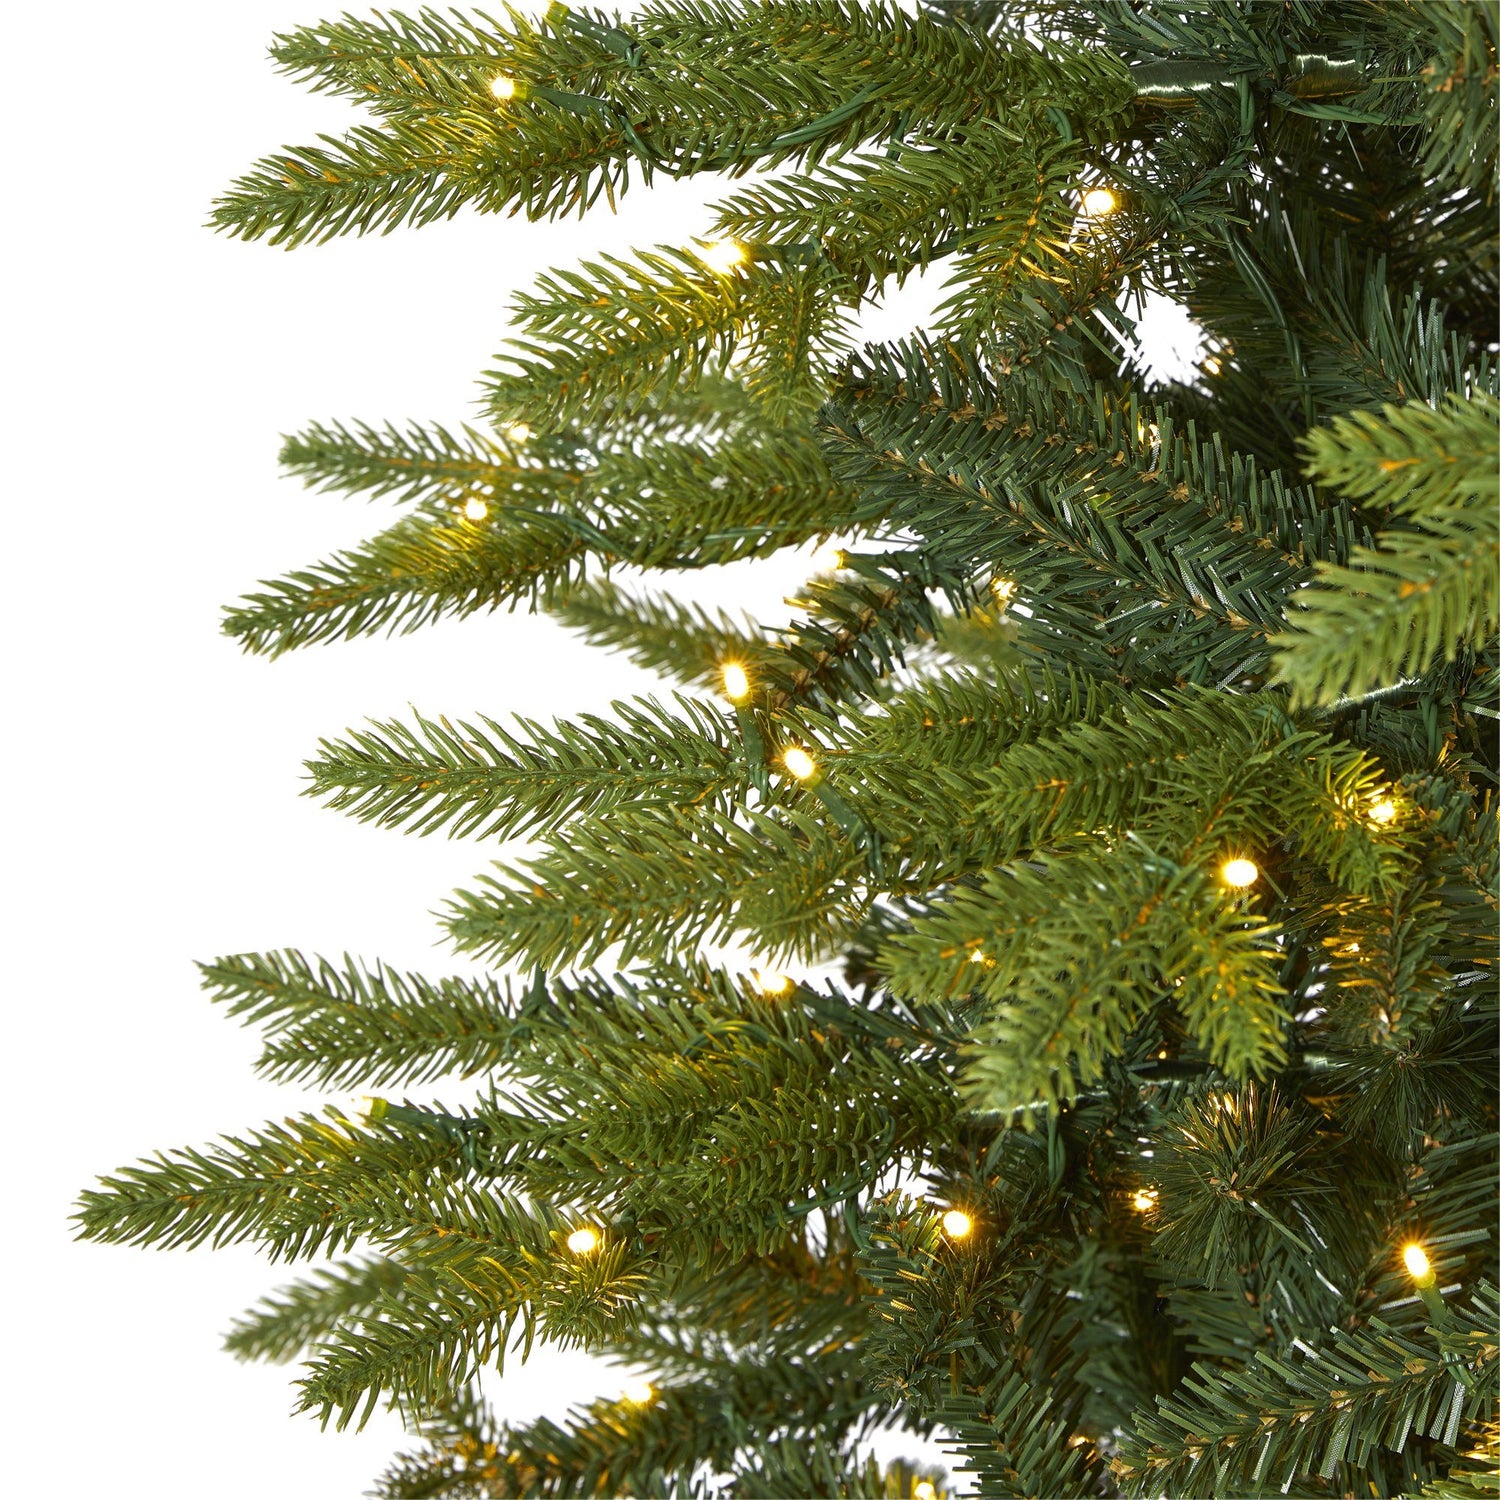 9’ Belgium Fir “Natural Look” Artificial Christmas Tree with 800 Clear LED Lights